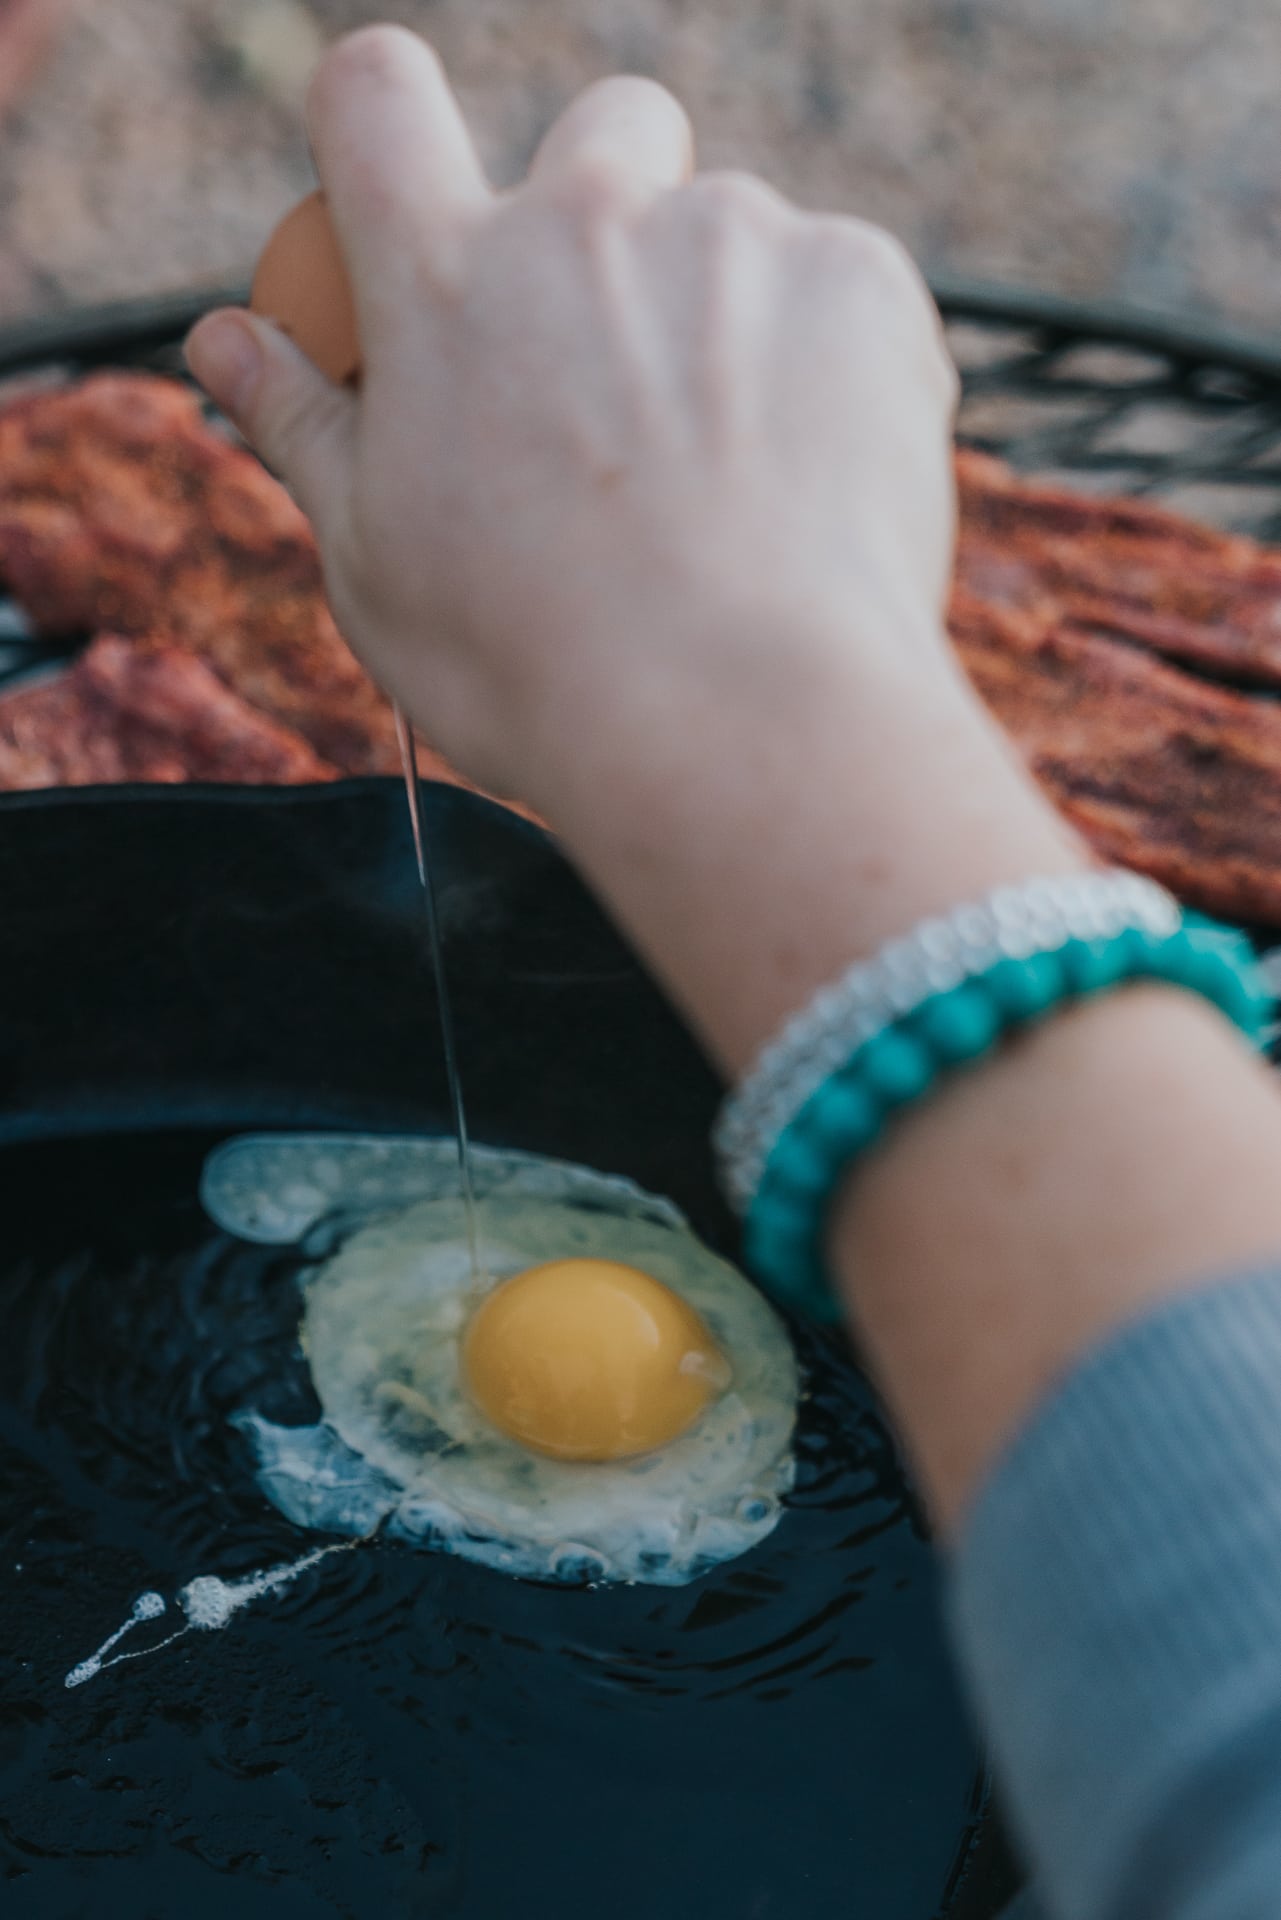 Hand cracking an egg into a cast iron skillet over campfire.